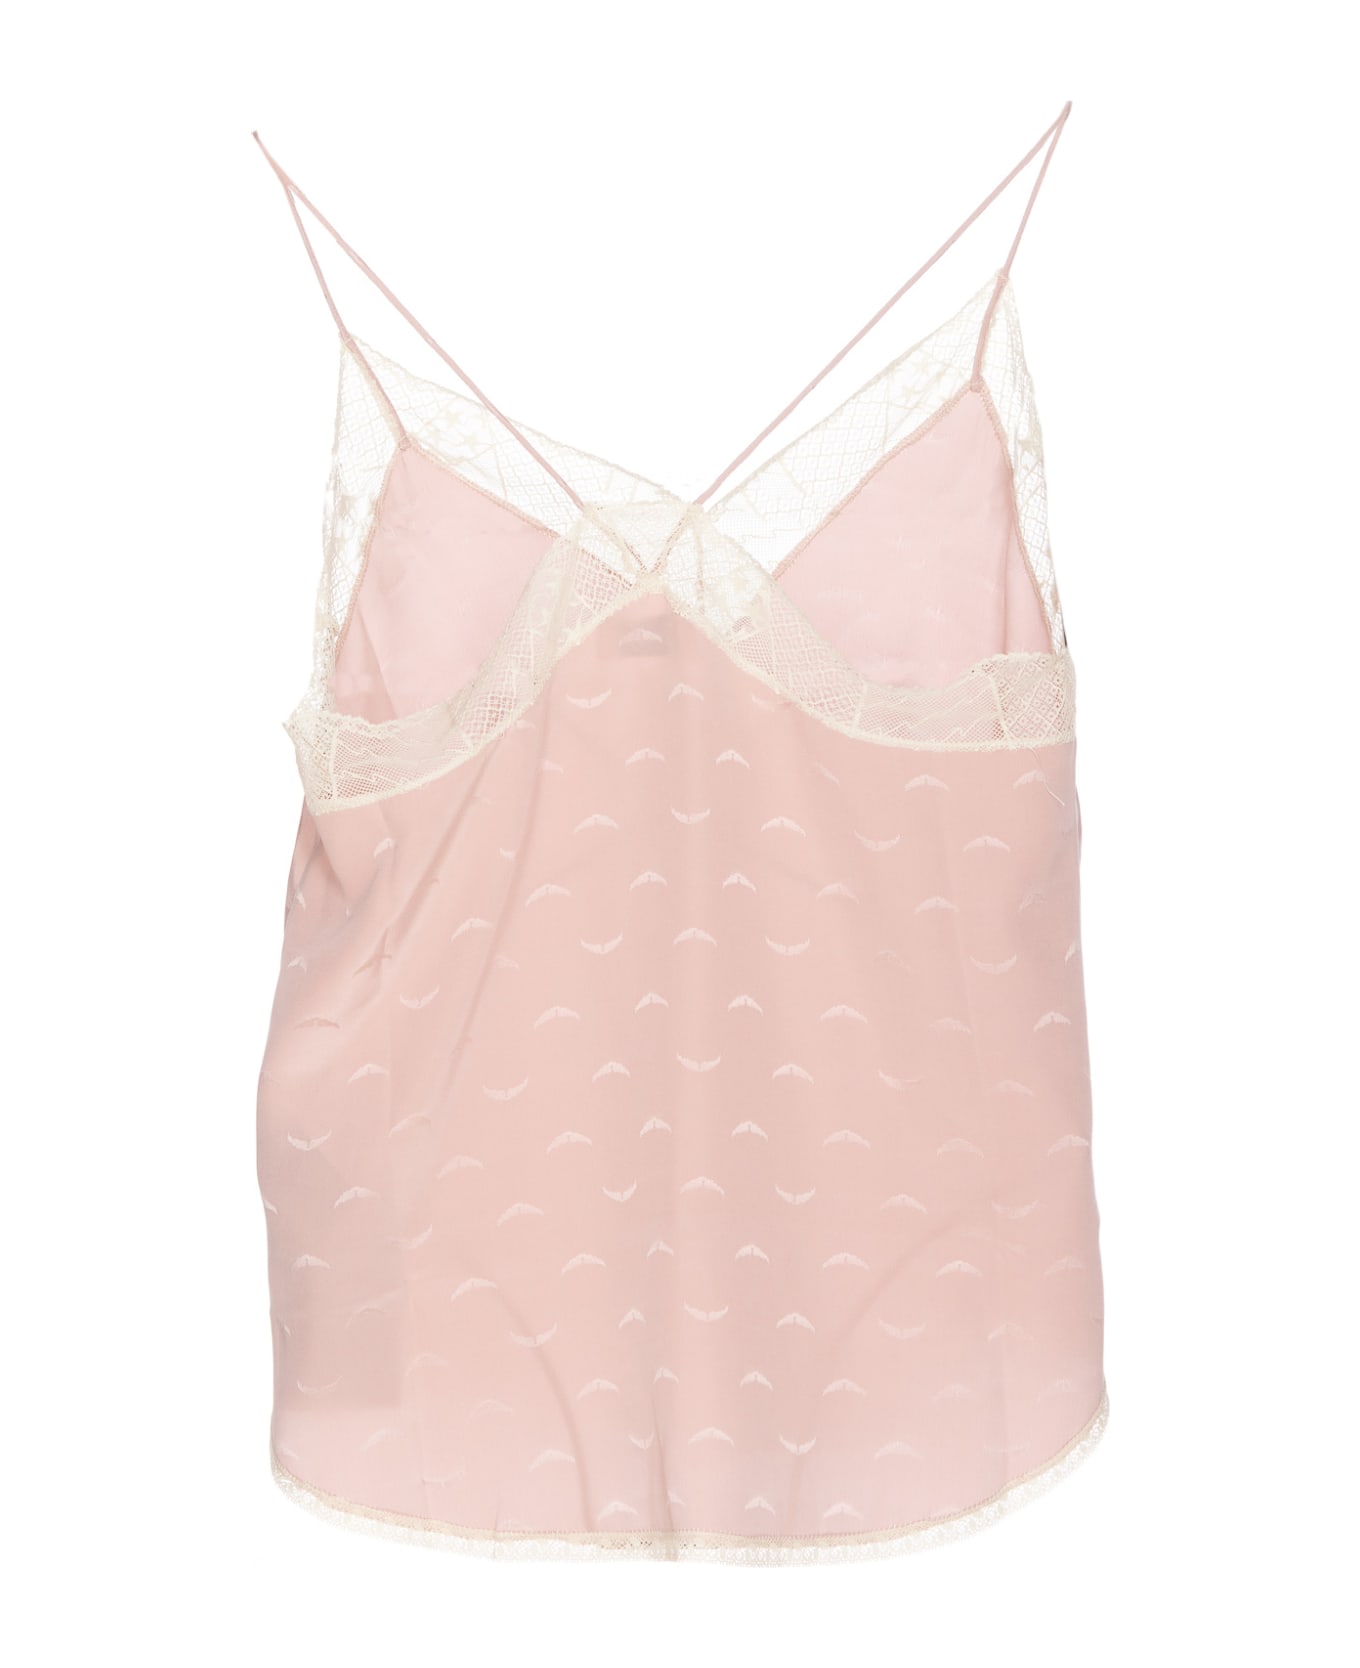 Zadig & Voltaire Christy Jac Wings Tank Top - Pink